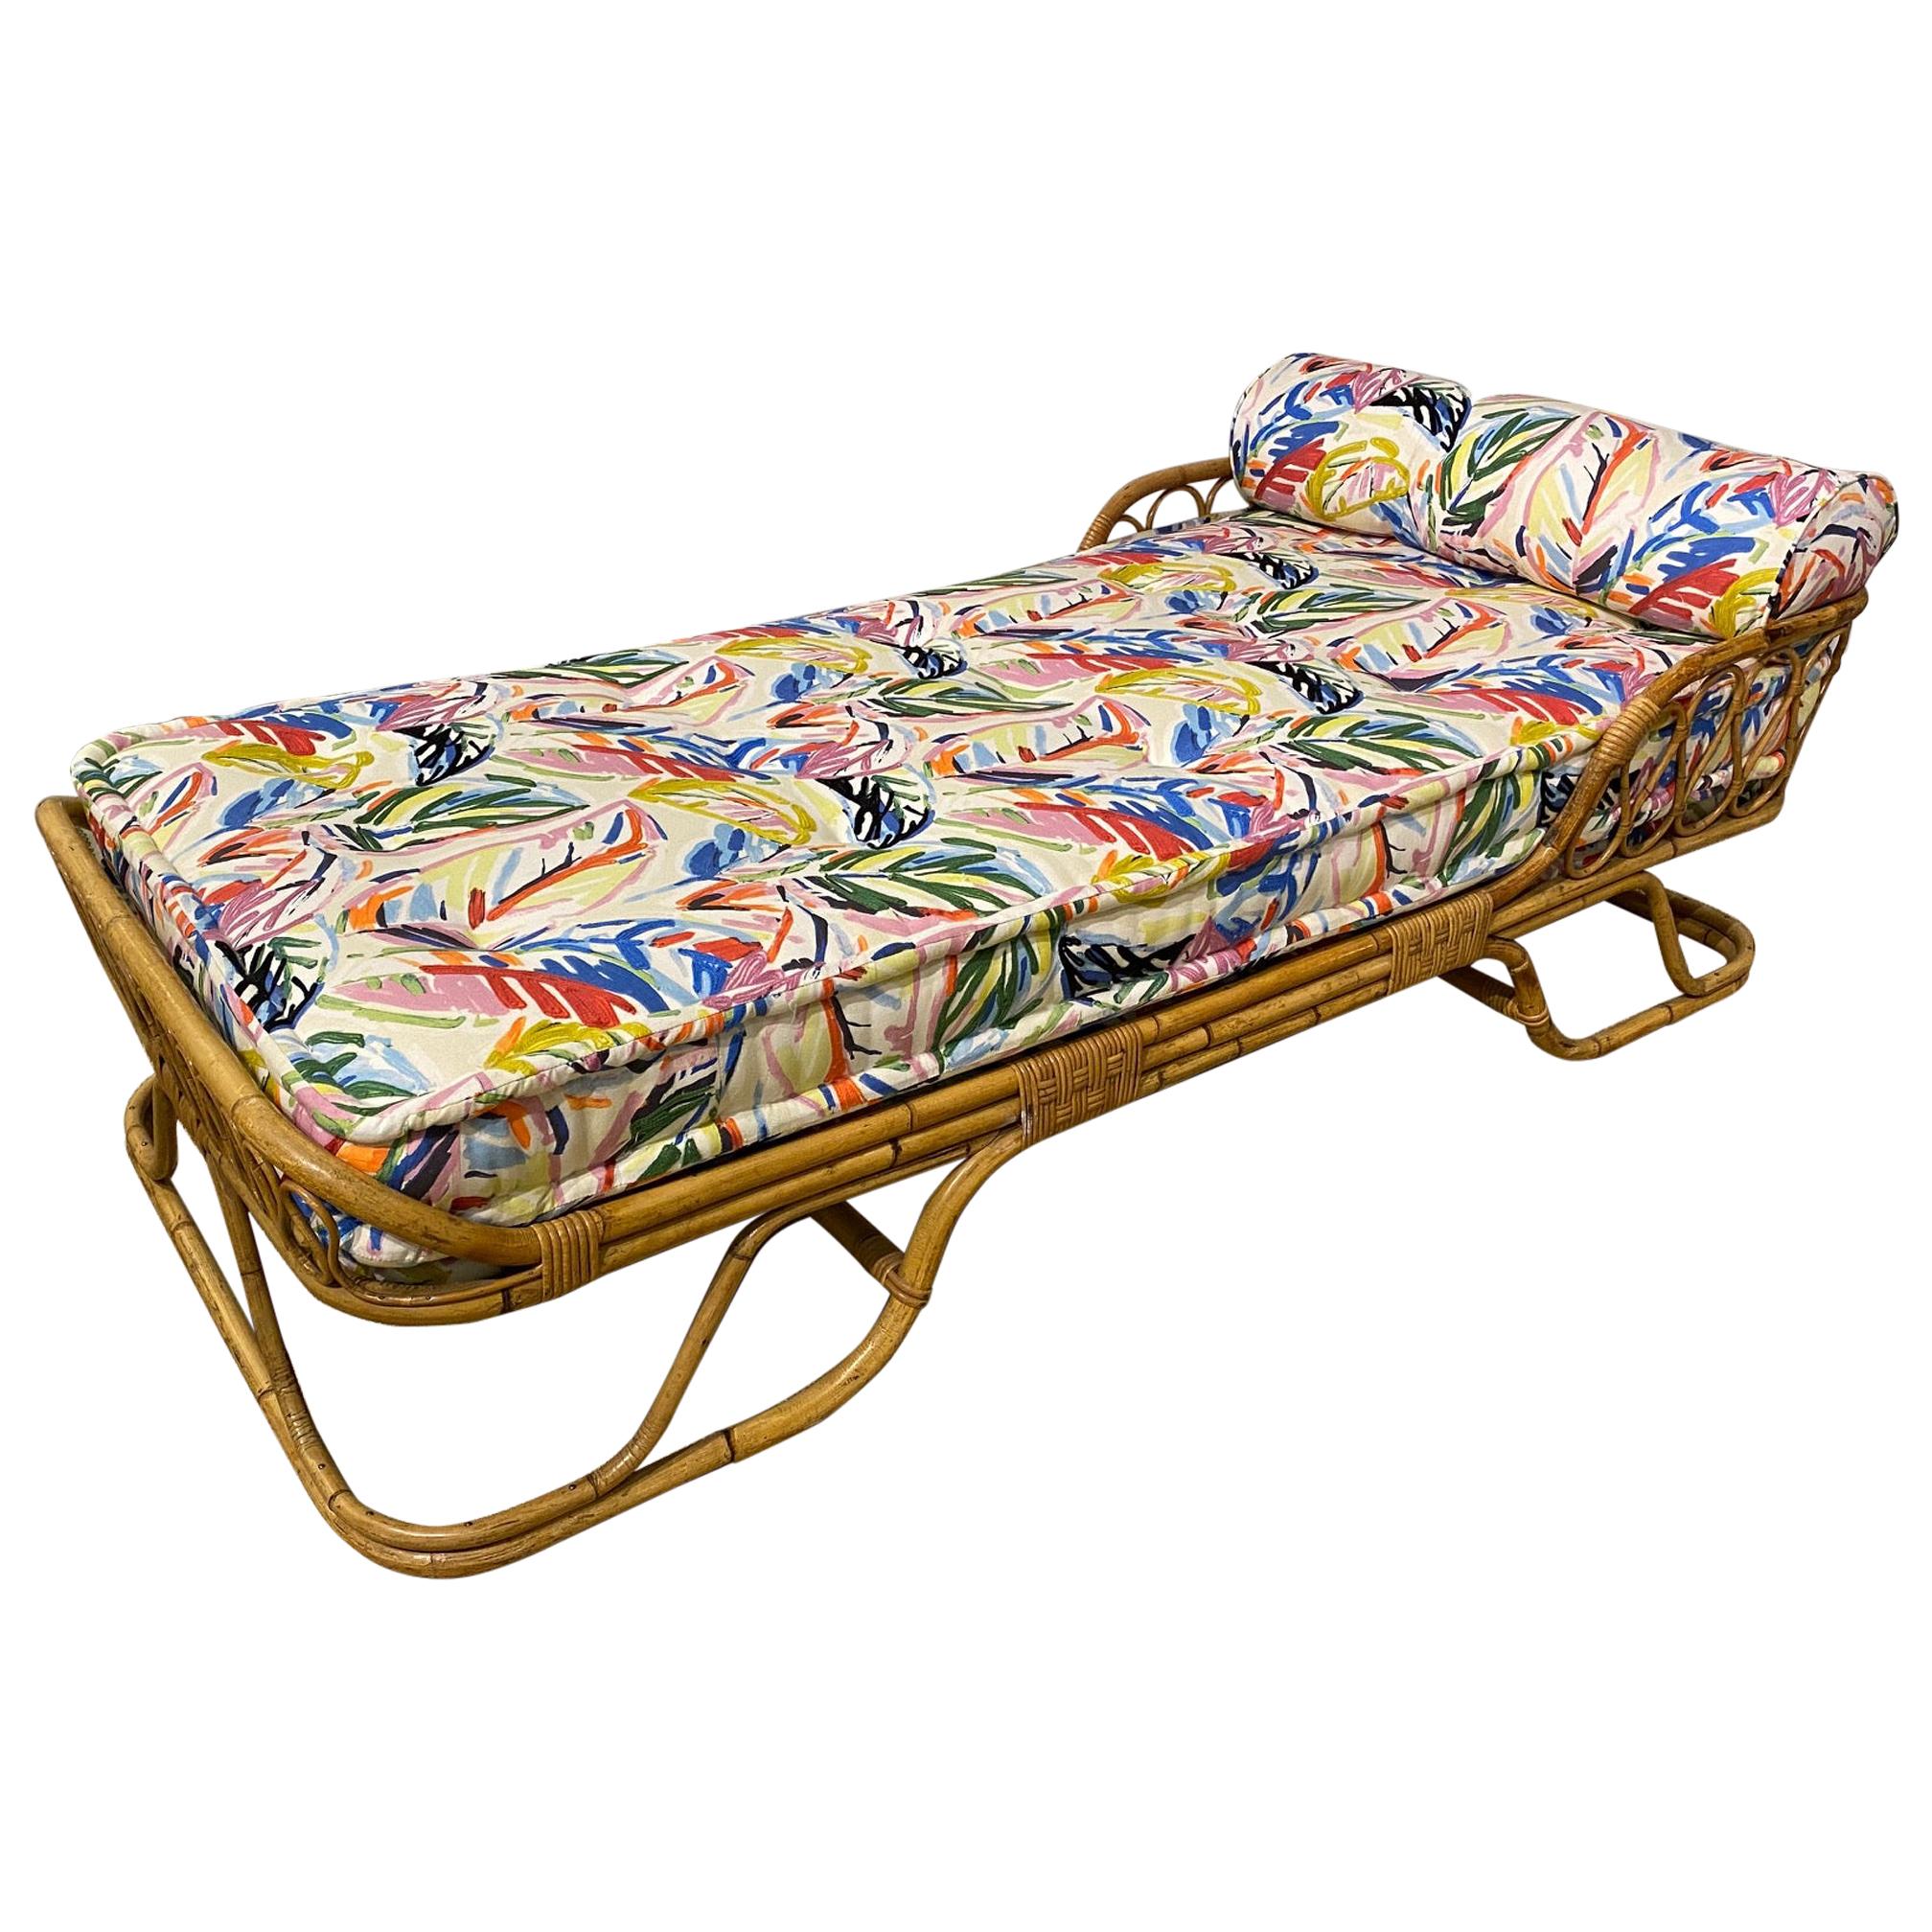 Vintage Italian Bamboo Daybed For Sale